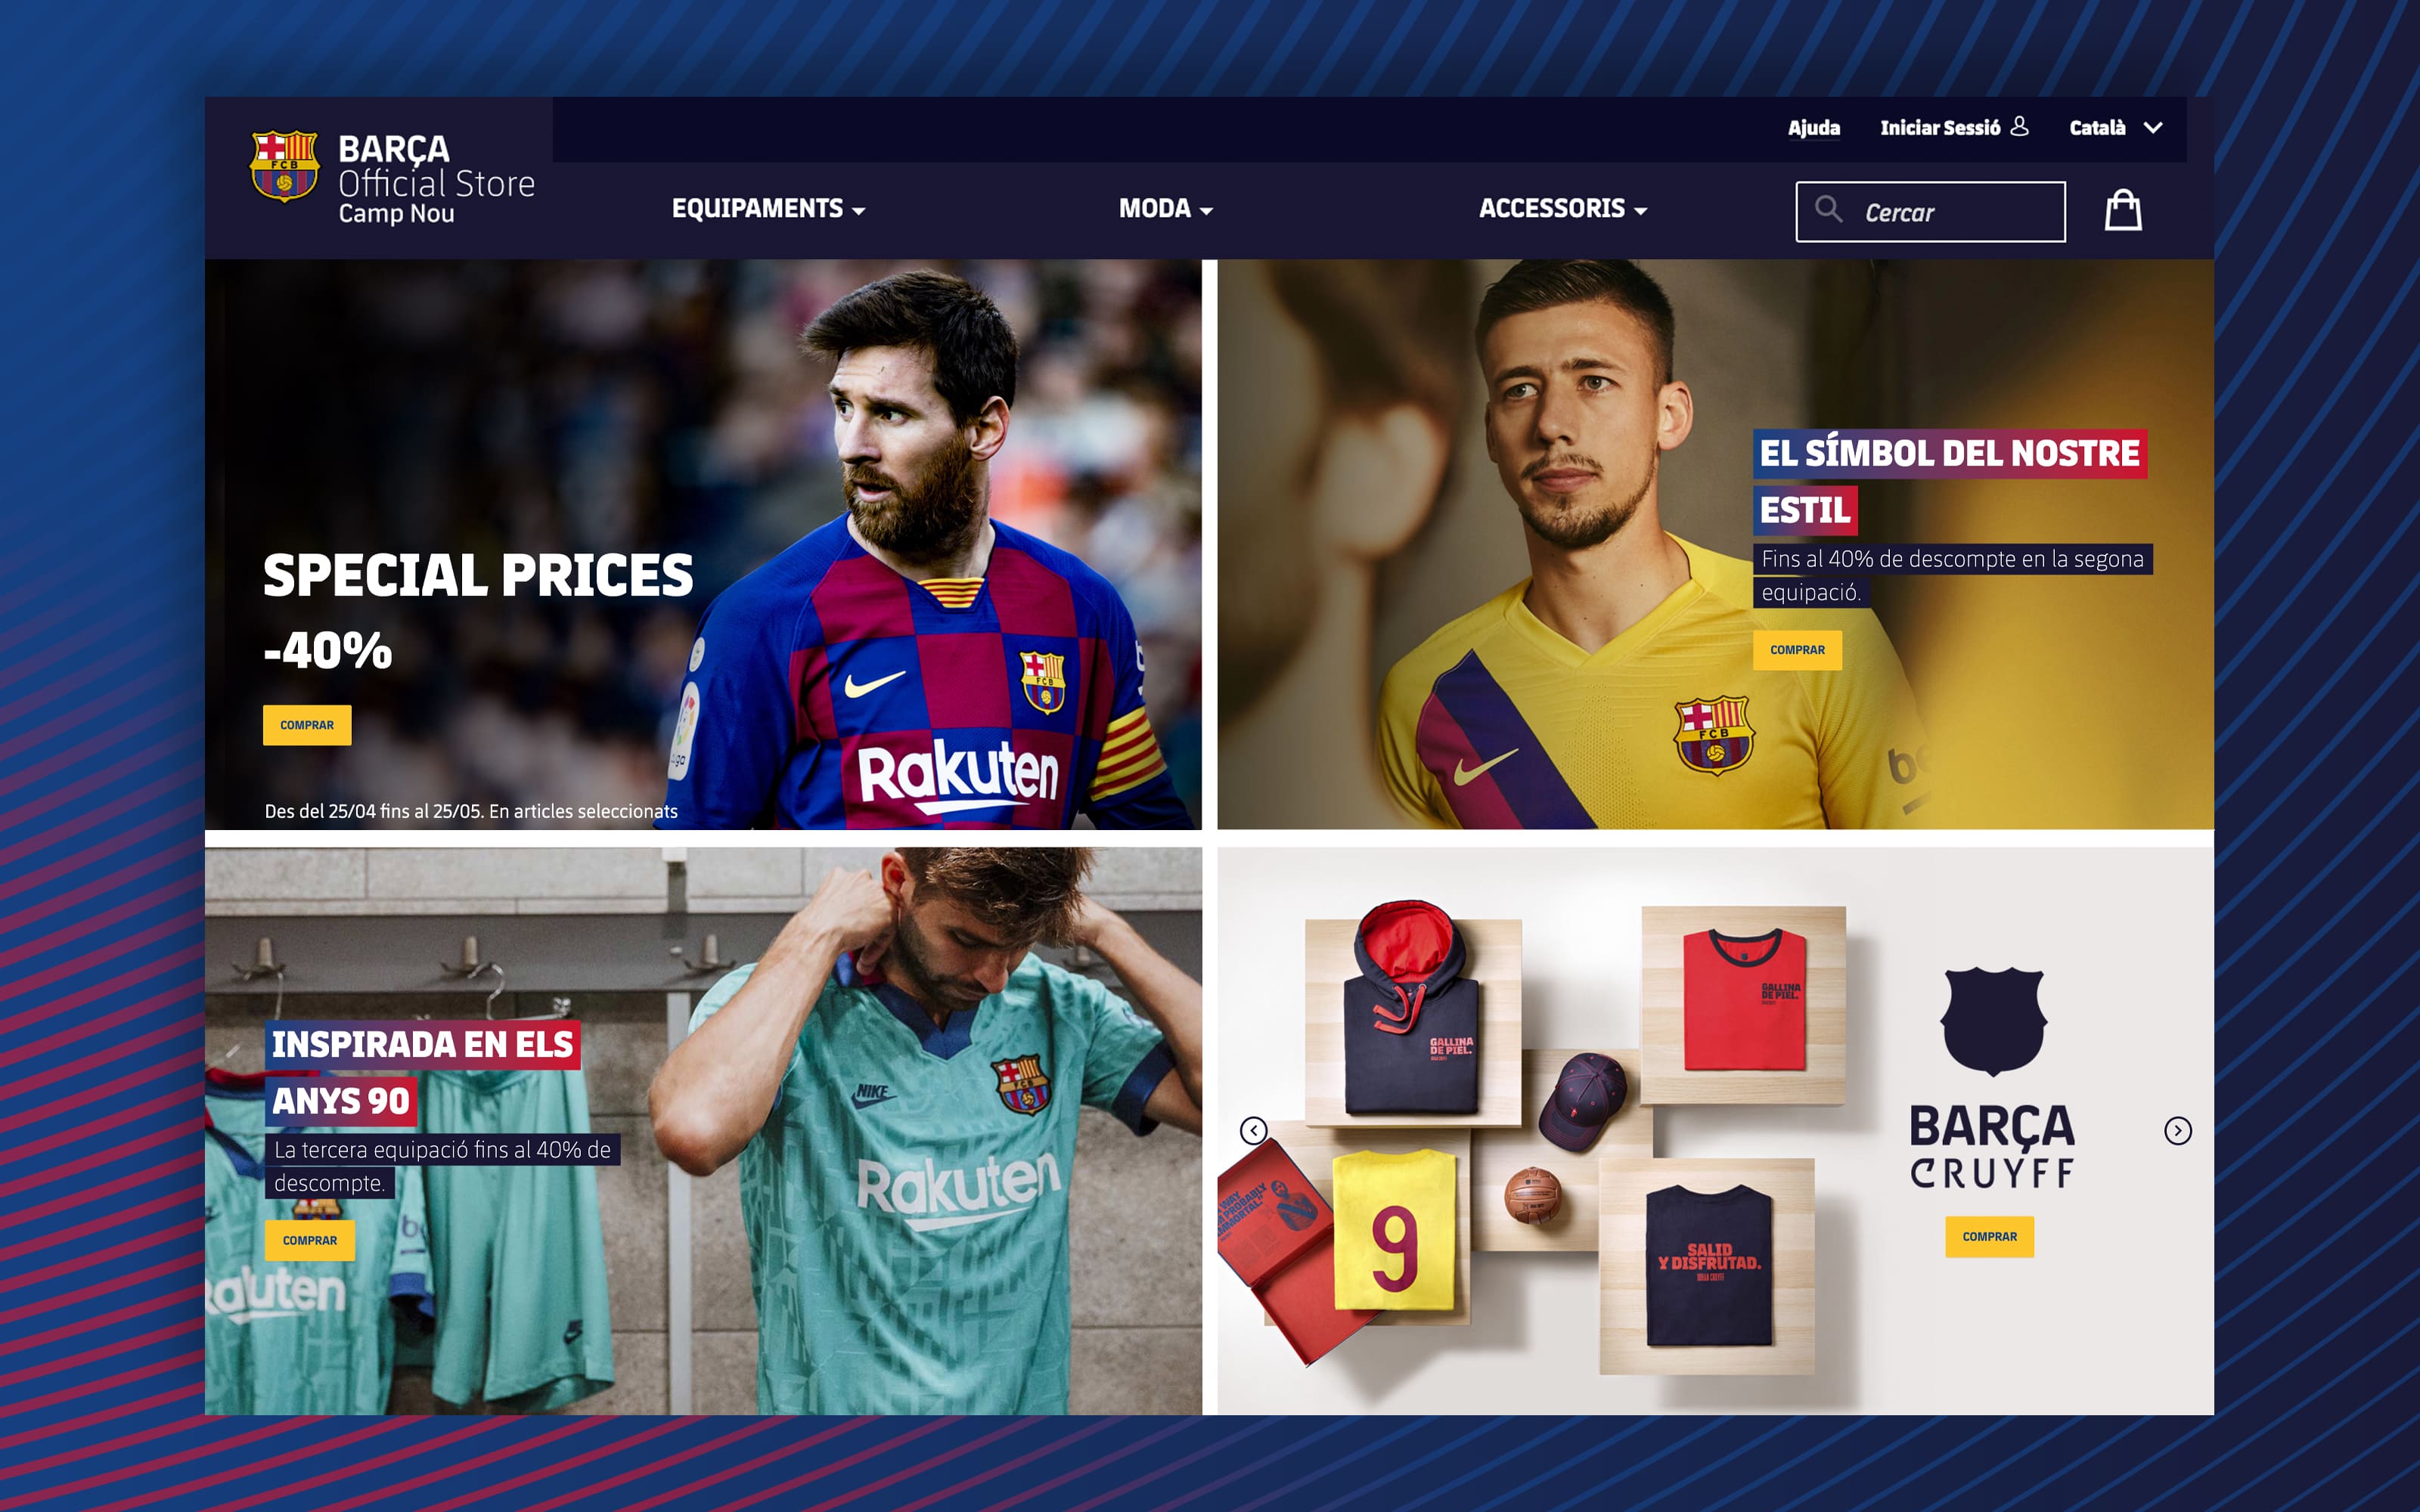 FC Barcelona launches its own official channel for the sale of products from the Barça Store at Camp Nou